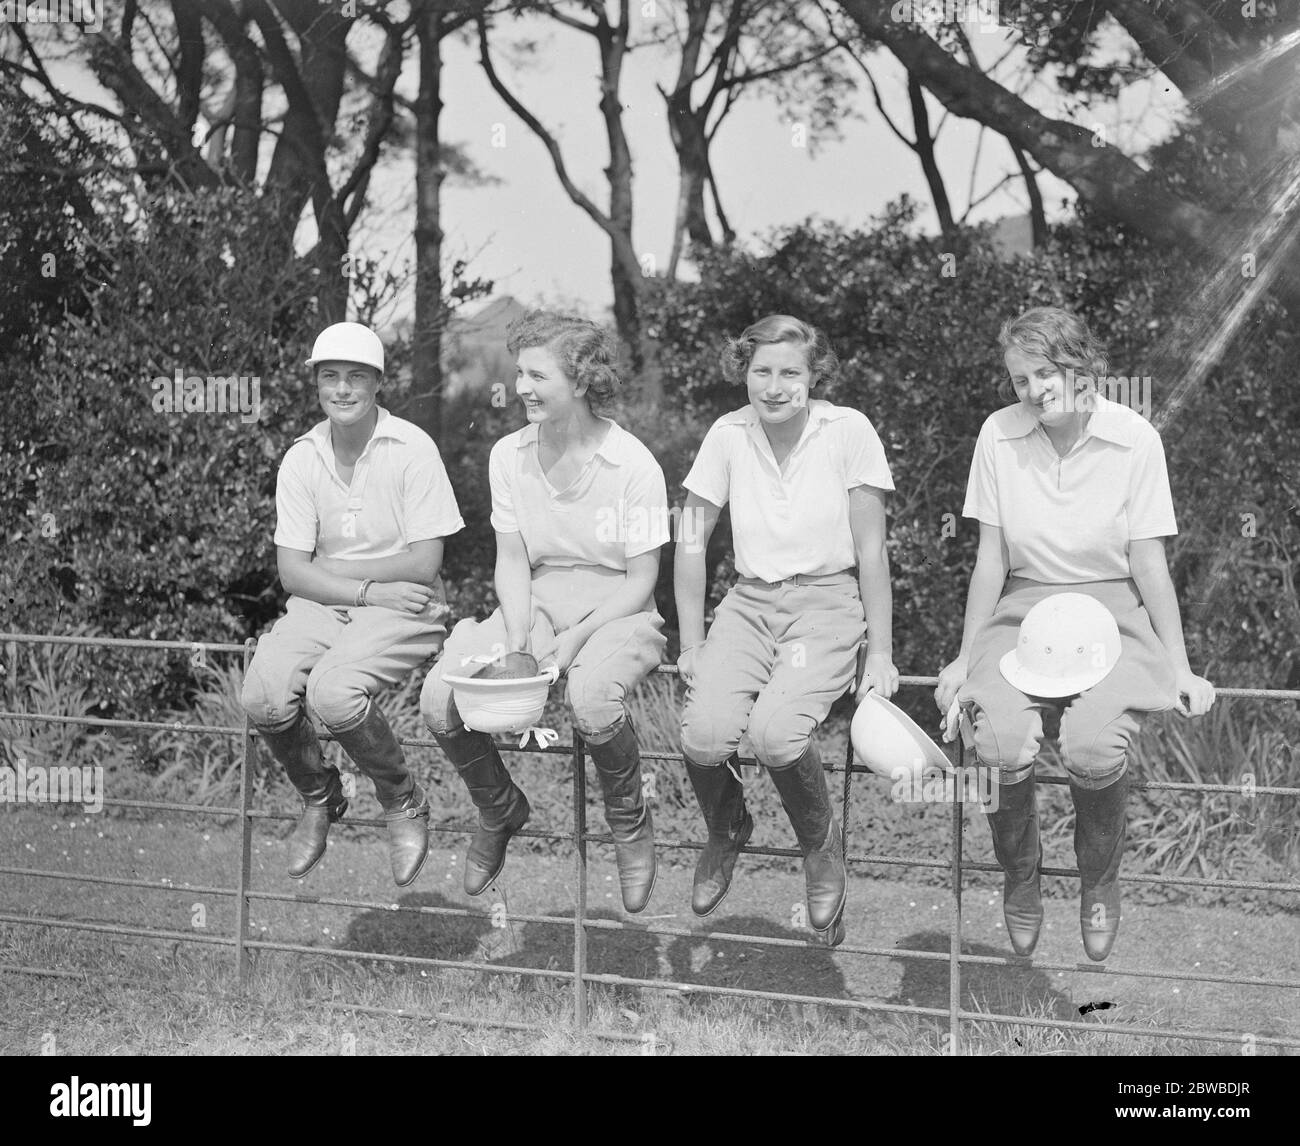 The London Ladies team , who met the Southdown Ladies team at Polo at Southwick . They are , from left to right ; Lady Priscilla Willoughby , Miss Muriel Wright, Lady Catherine Willoughby and Lady Violet Pakenham . 1933 Stock Photo